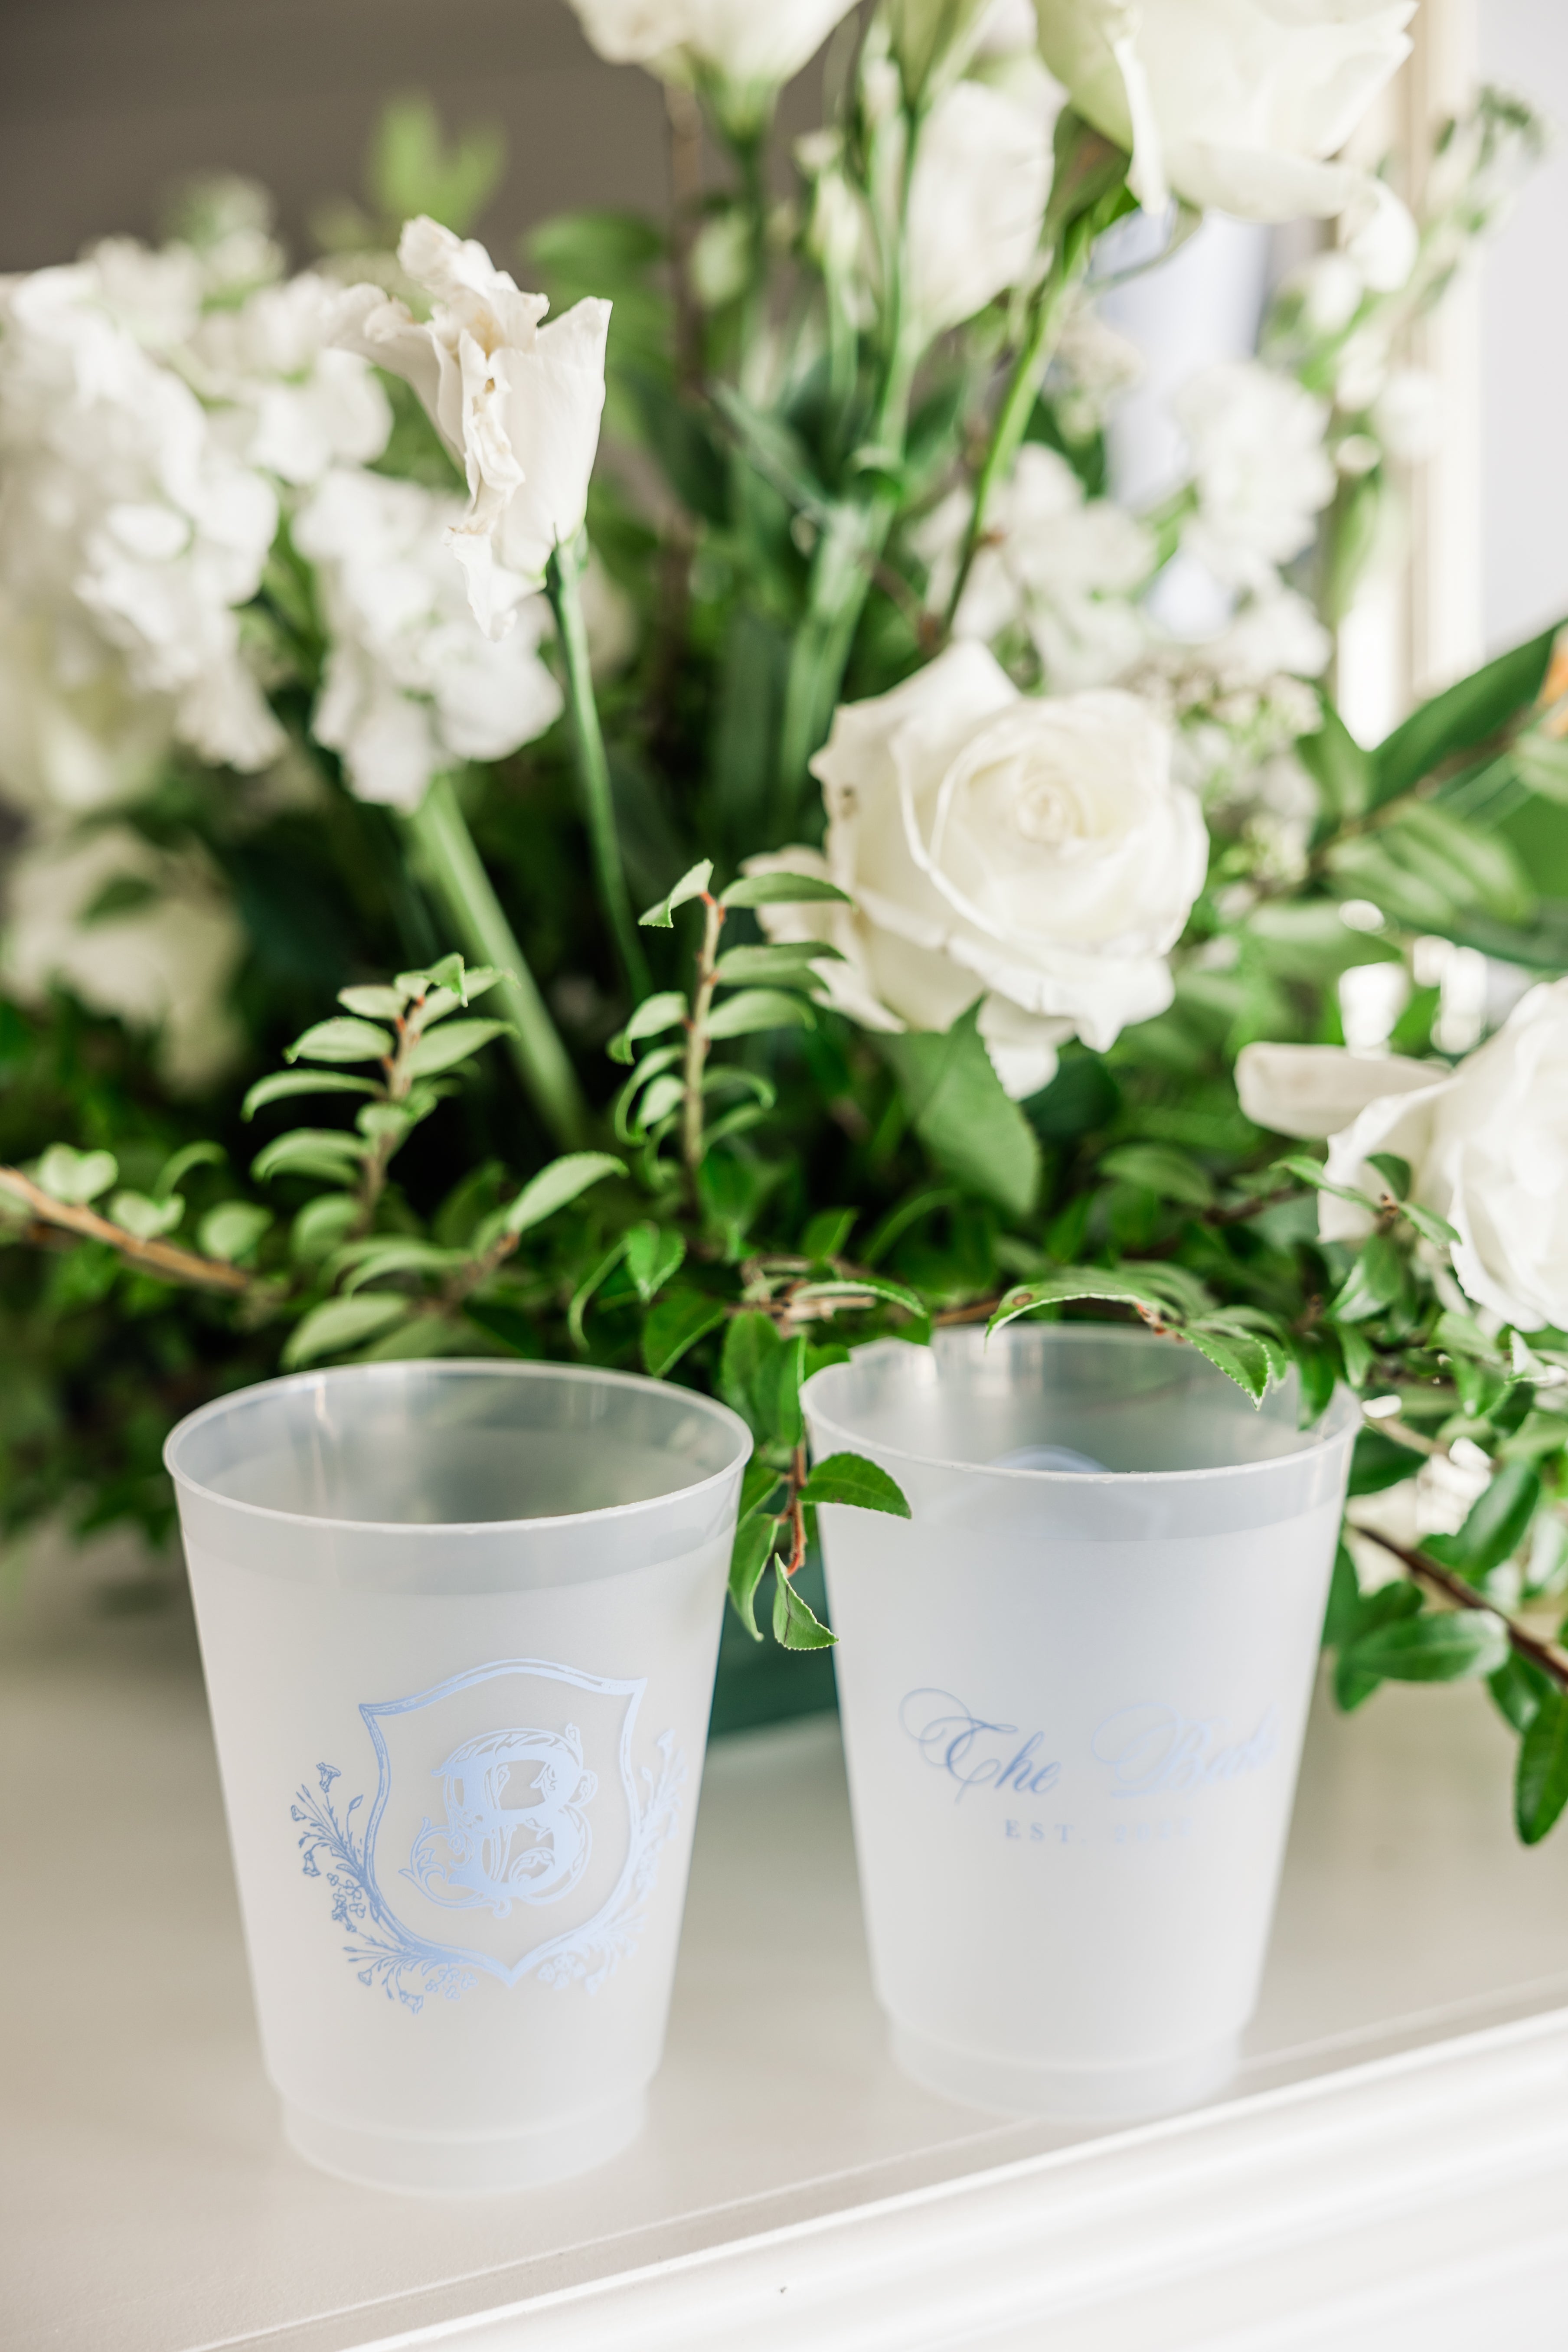 Ledgewood-Fine-Stationery-Wedding-Day-Of-Details-Shatterproof-Cups